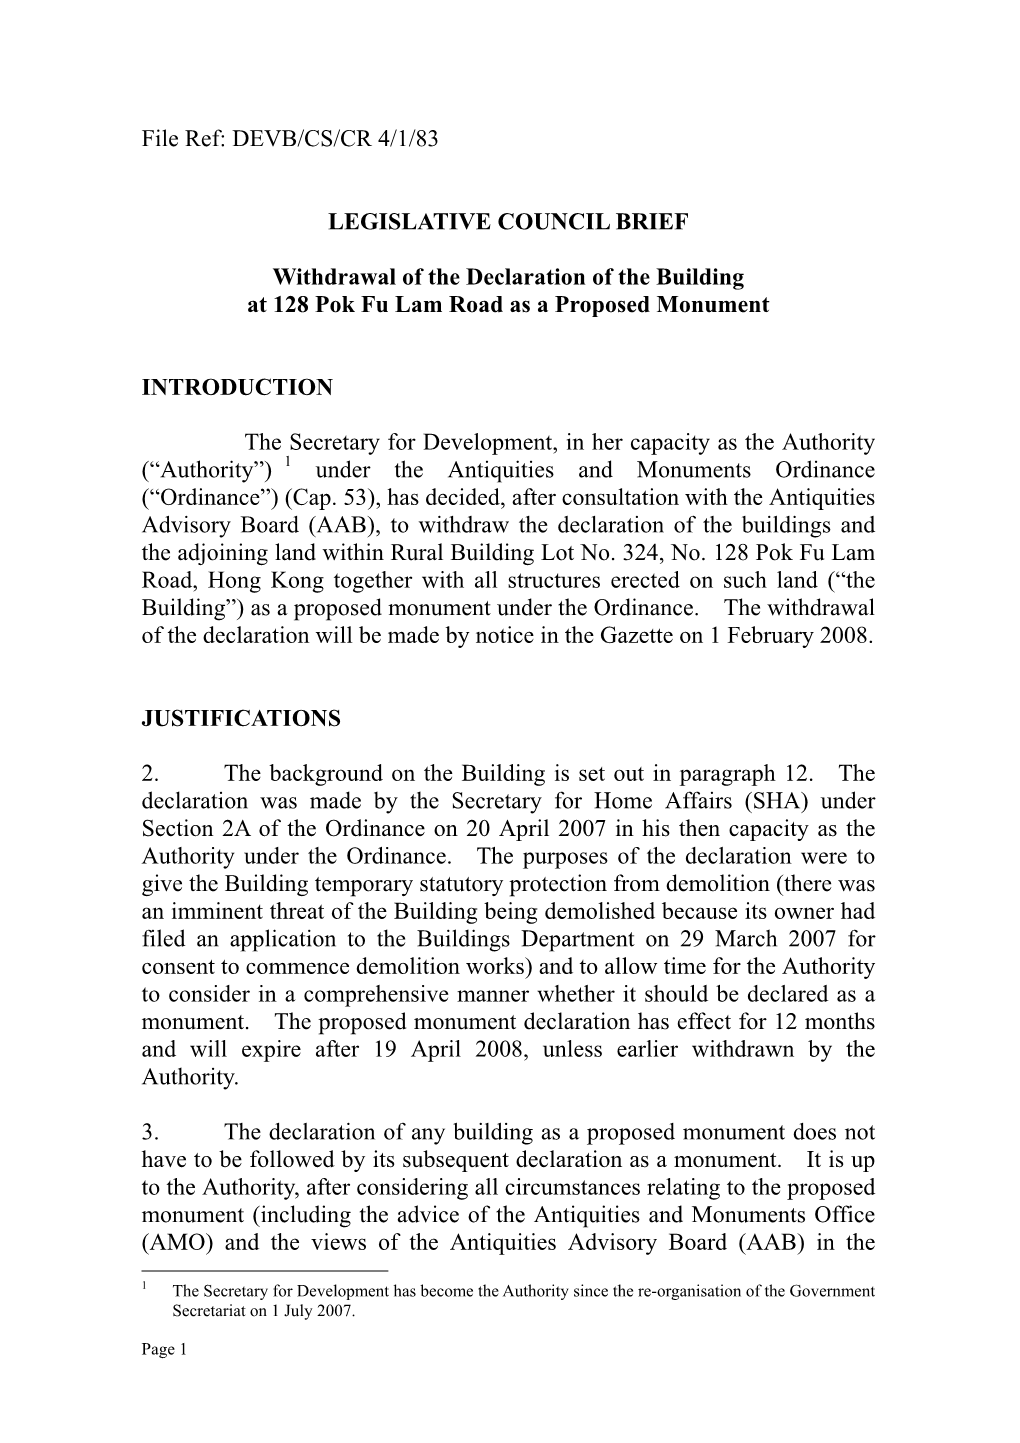 Withdrawal of the Declaration of the Building at 128 Pok Fu Lam Road As a Proposed Monument